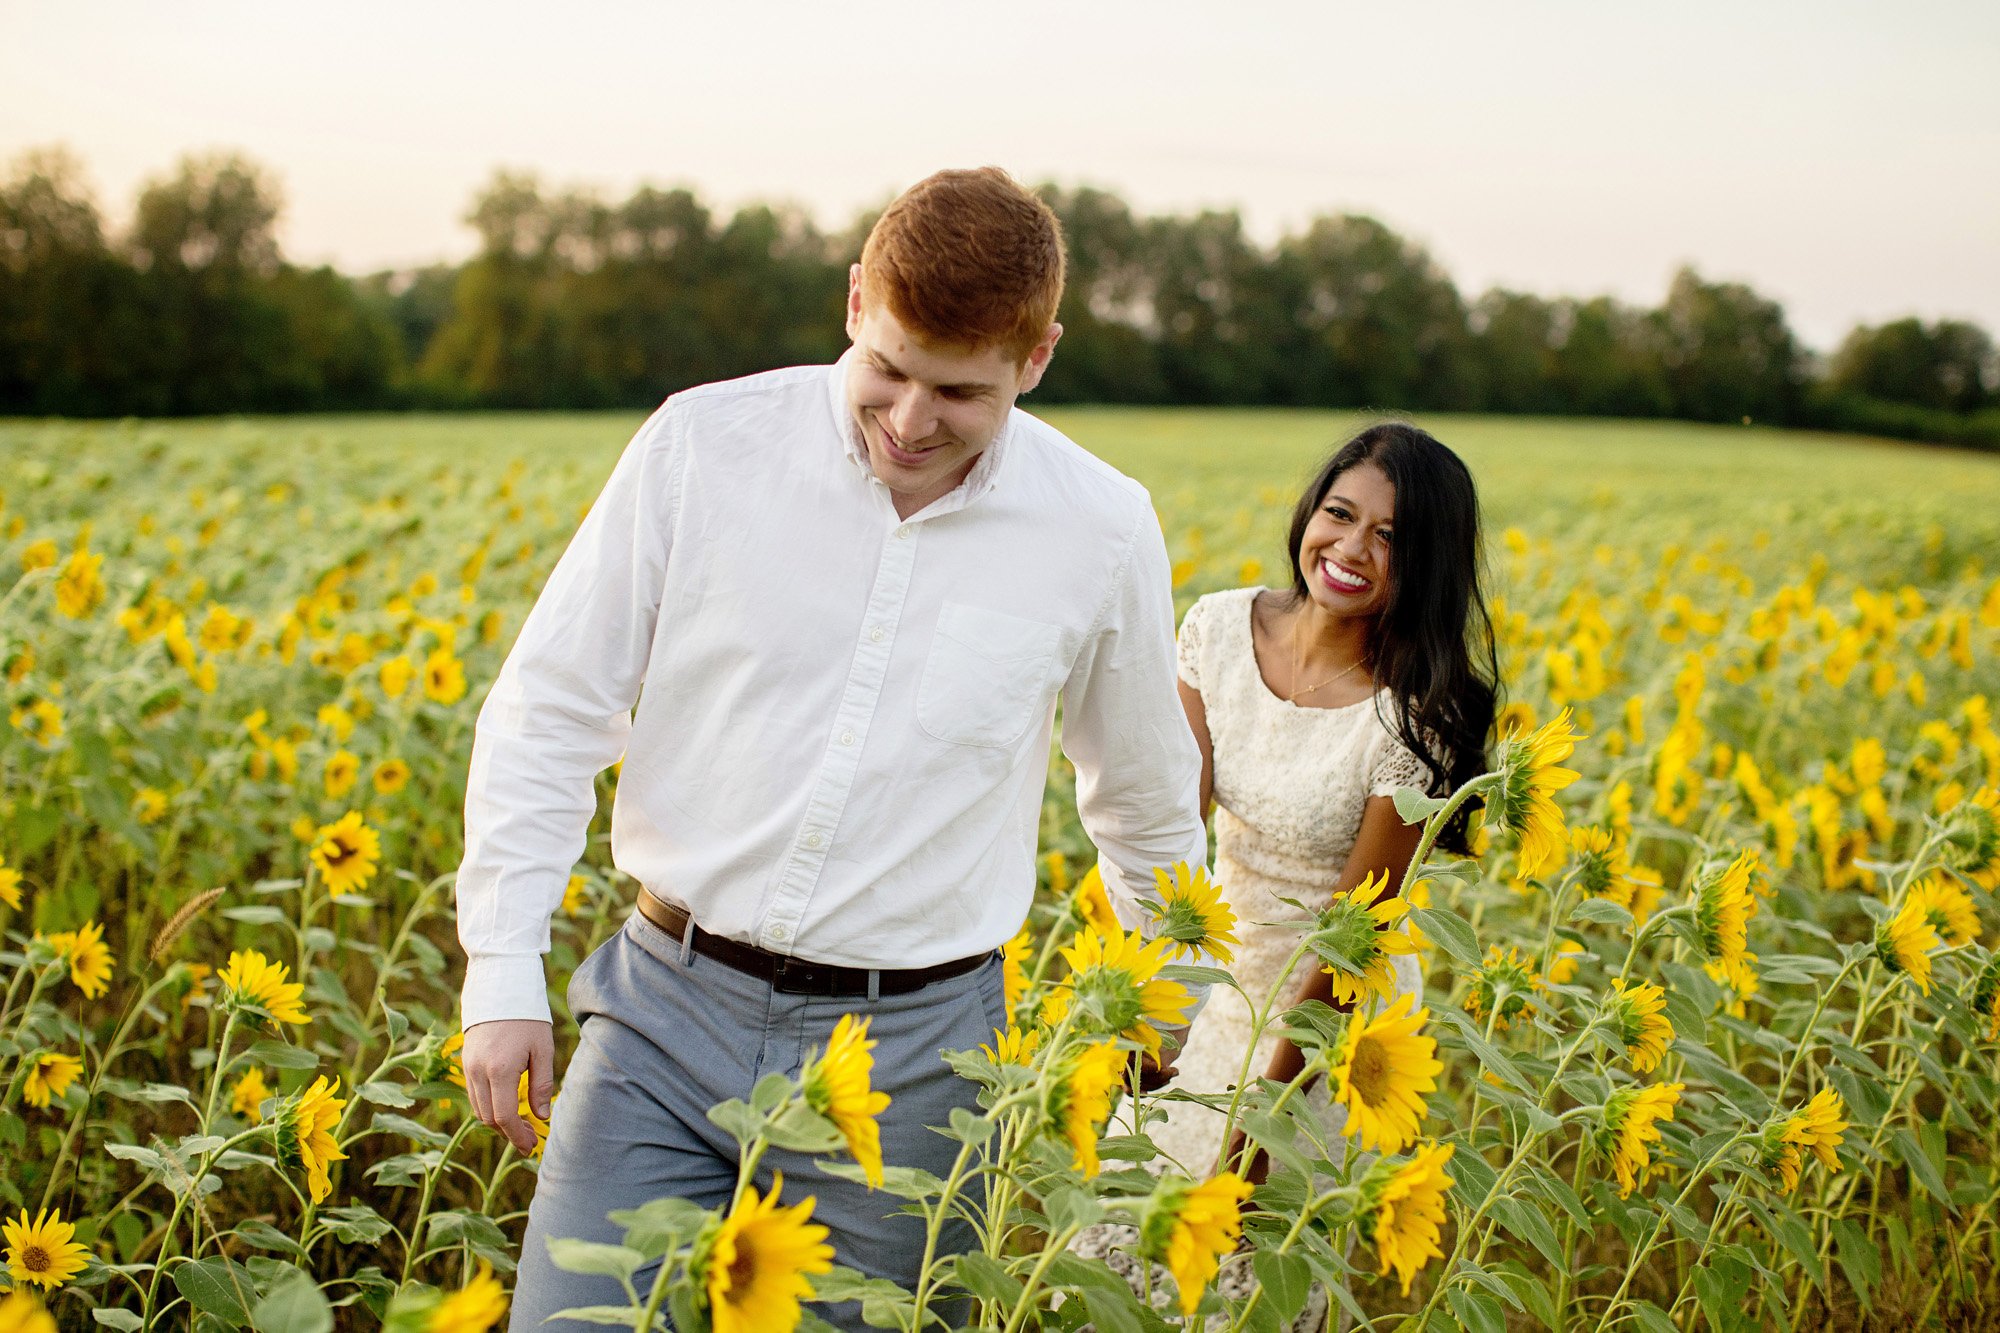 Seriously_Sabrina_Photography_Lexington_Midway_Kentucky_Engagement_Merefield_Sunflowers_Naz_and_Drew12.jpg